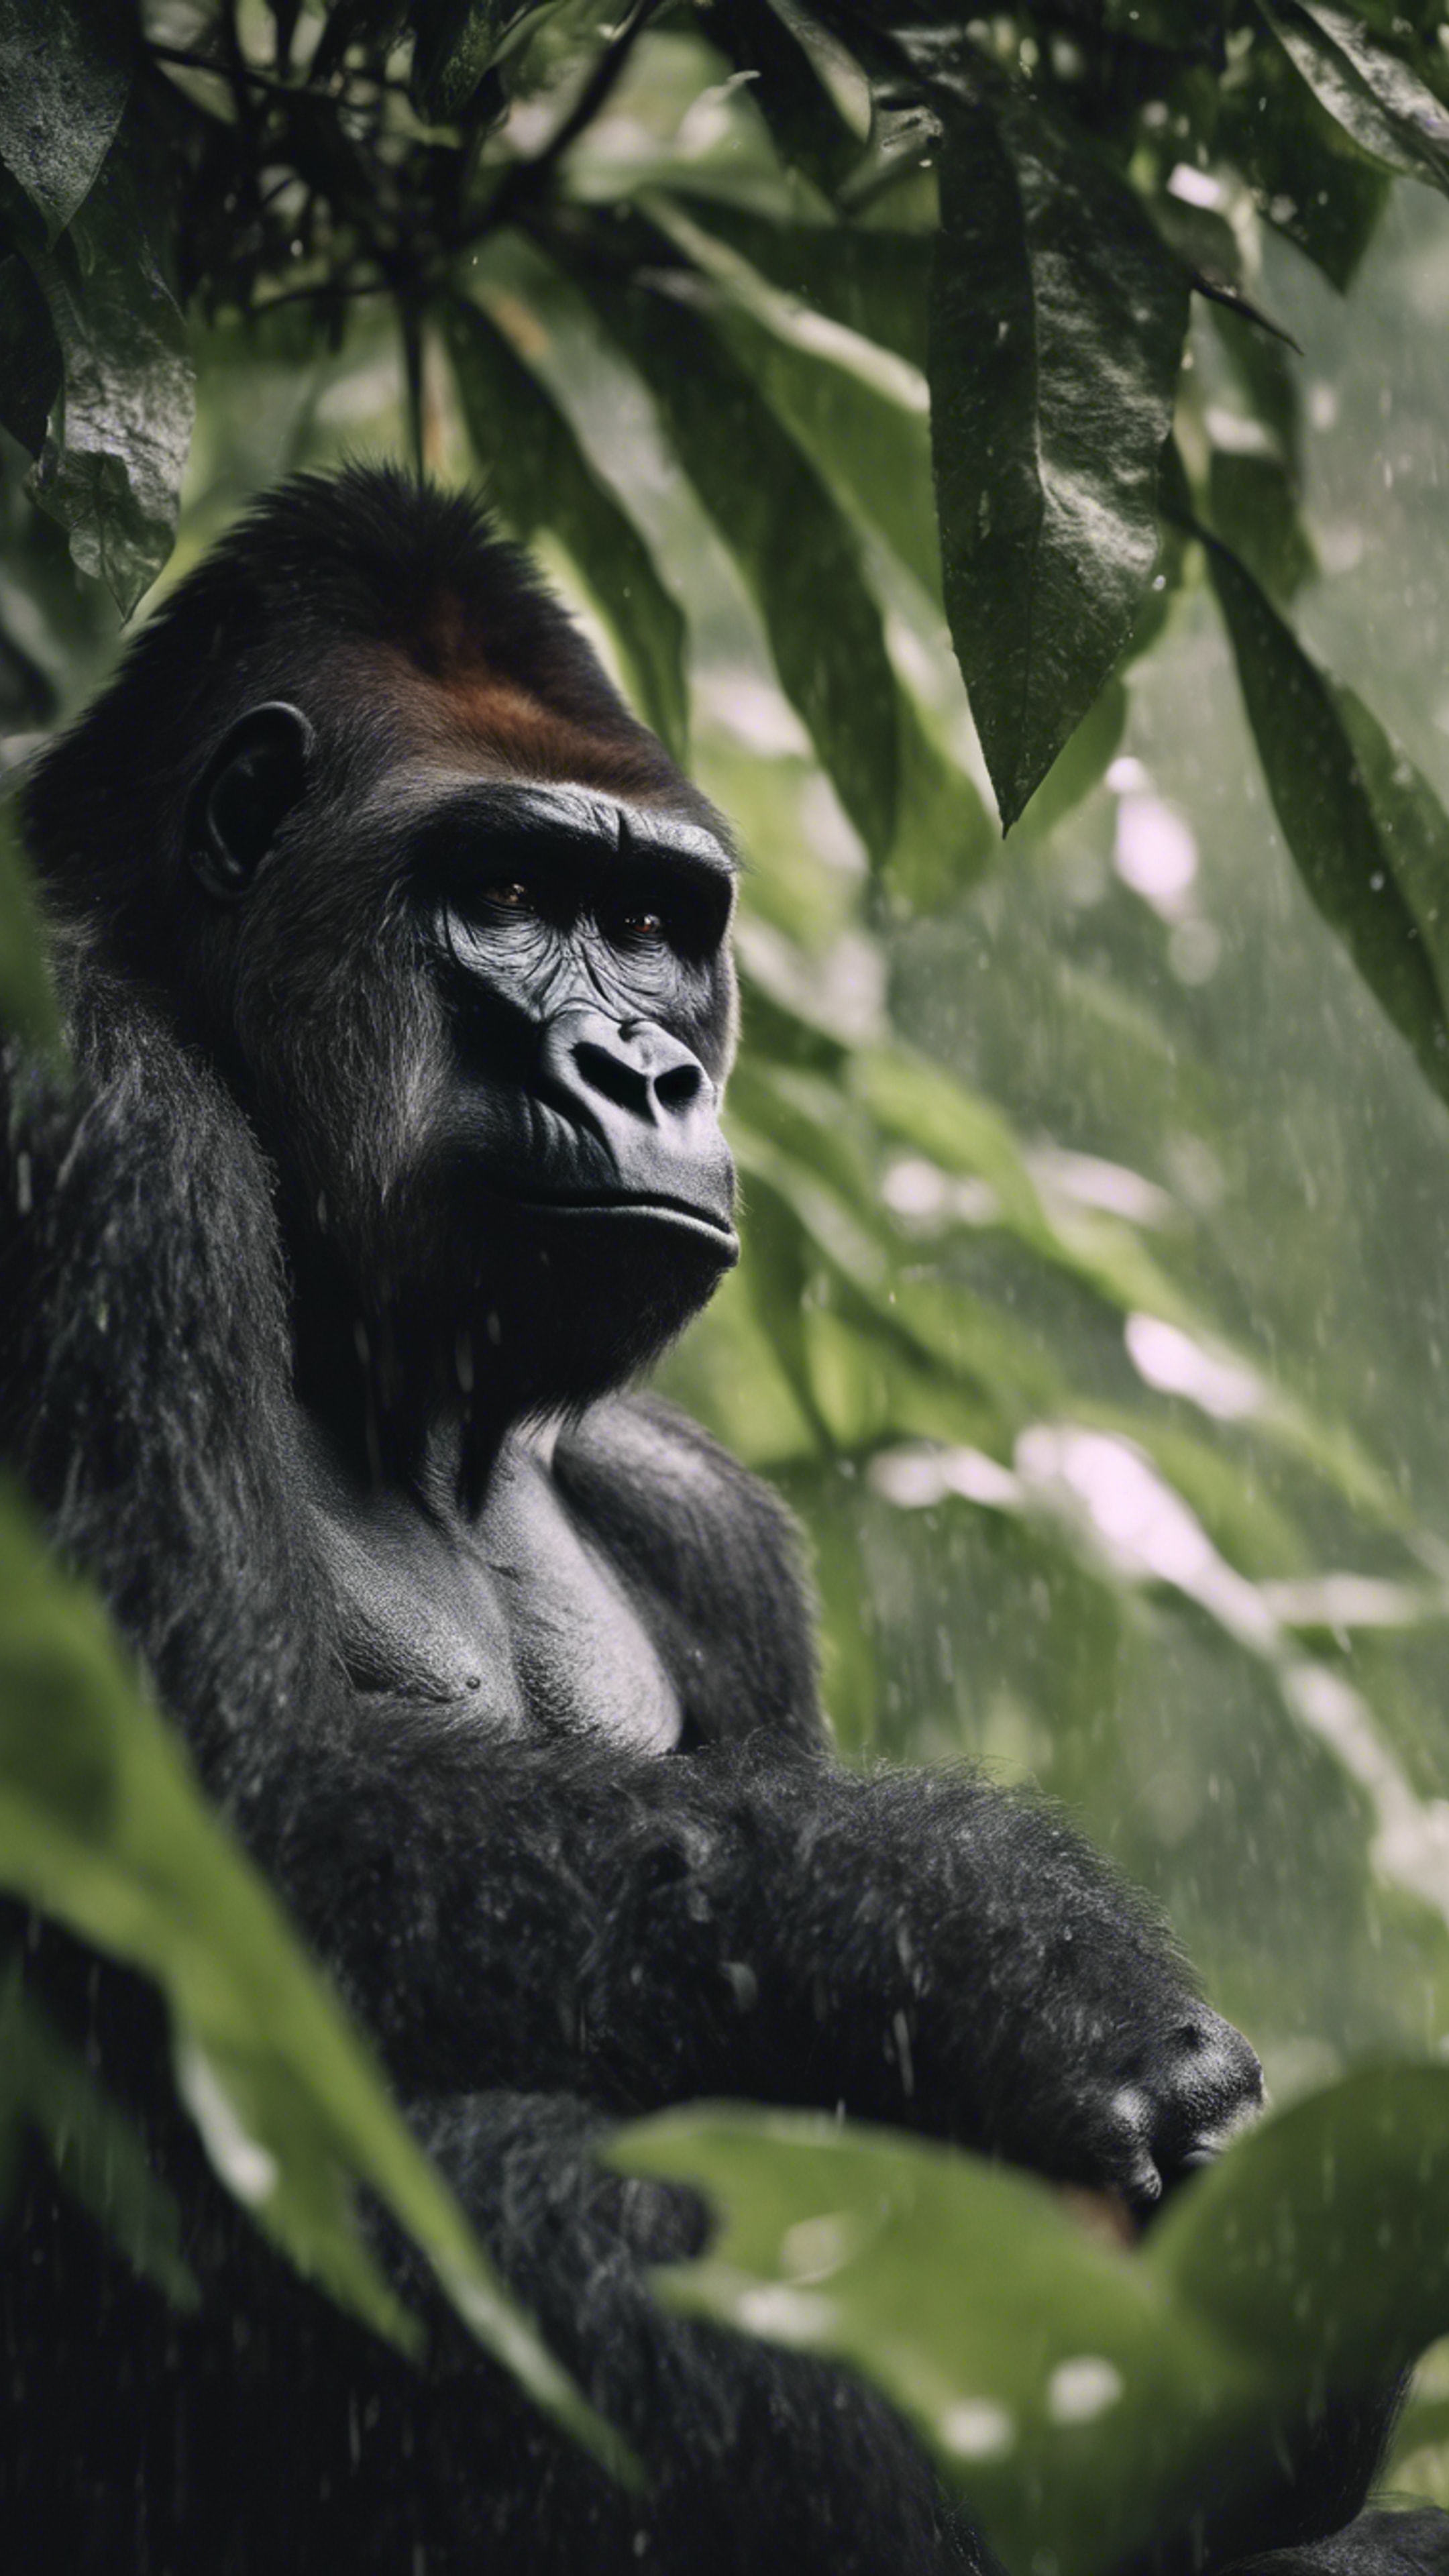 A sad gorilla on a rainy day, gazing out from under the shelter of giant leaves. ورق الجدران[ce7c66a51f504b8e8f6d]